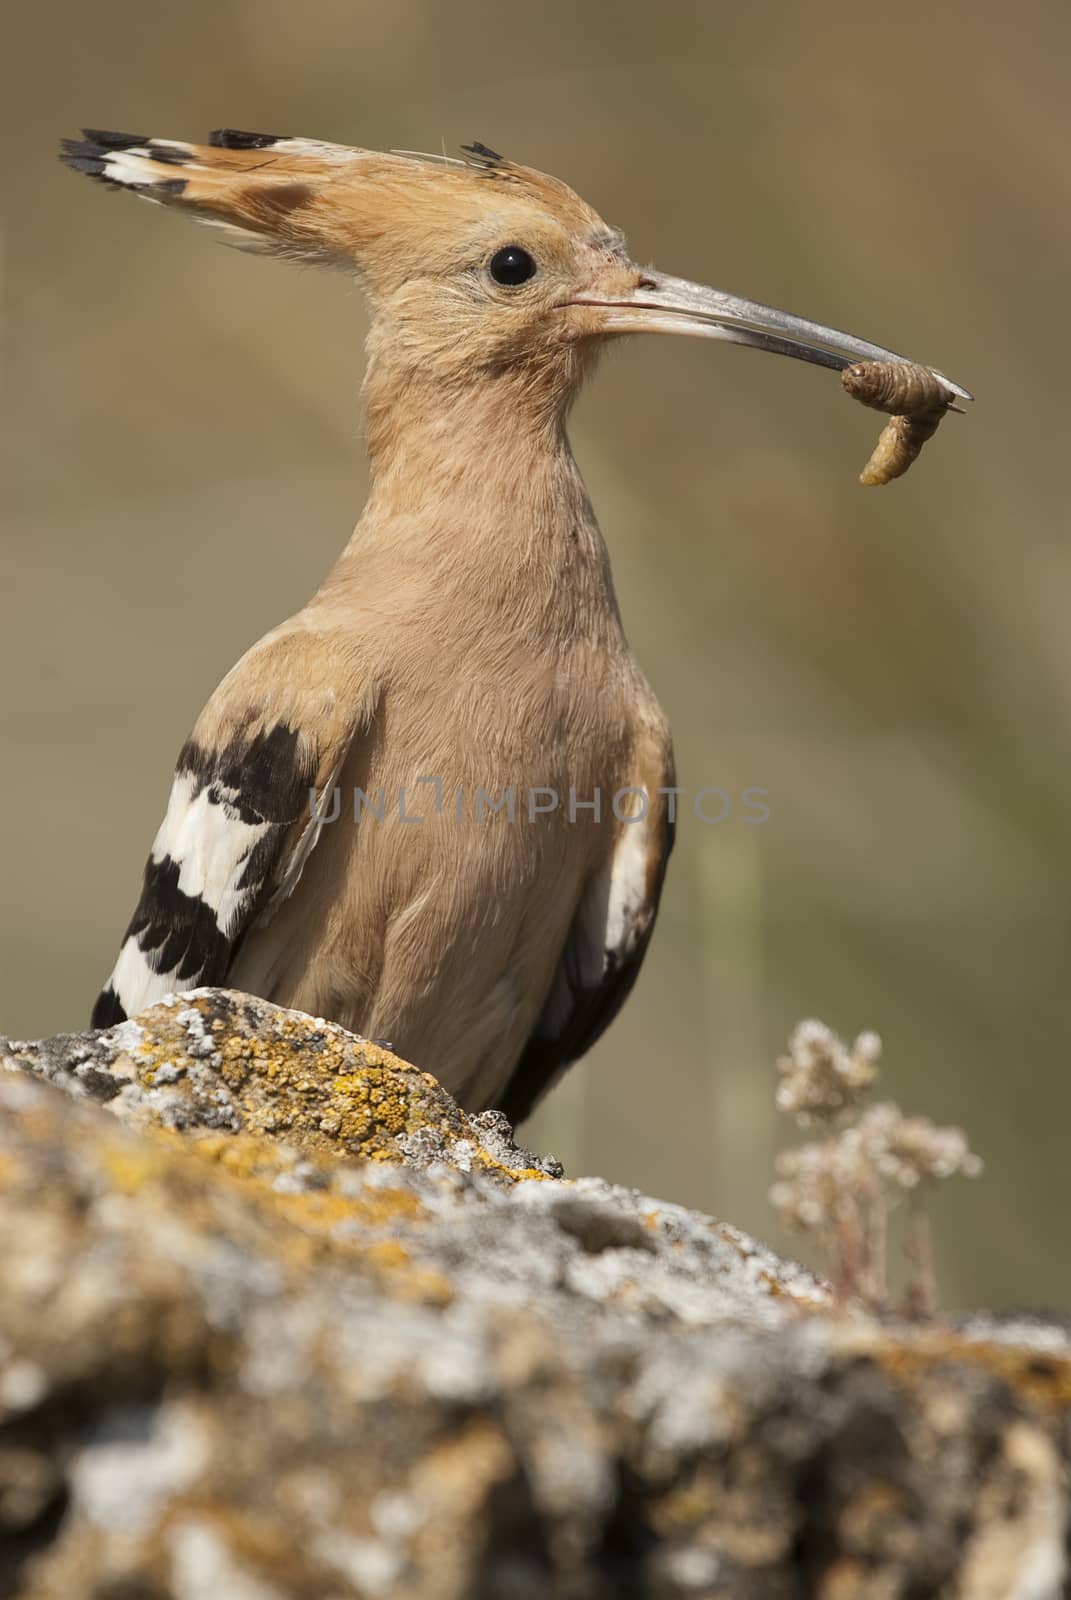 Eurasia Hoopoe or Common Hoopoe (Upupa epops), with food in the  by jalonsohu@gmail.com